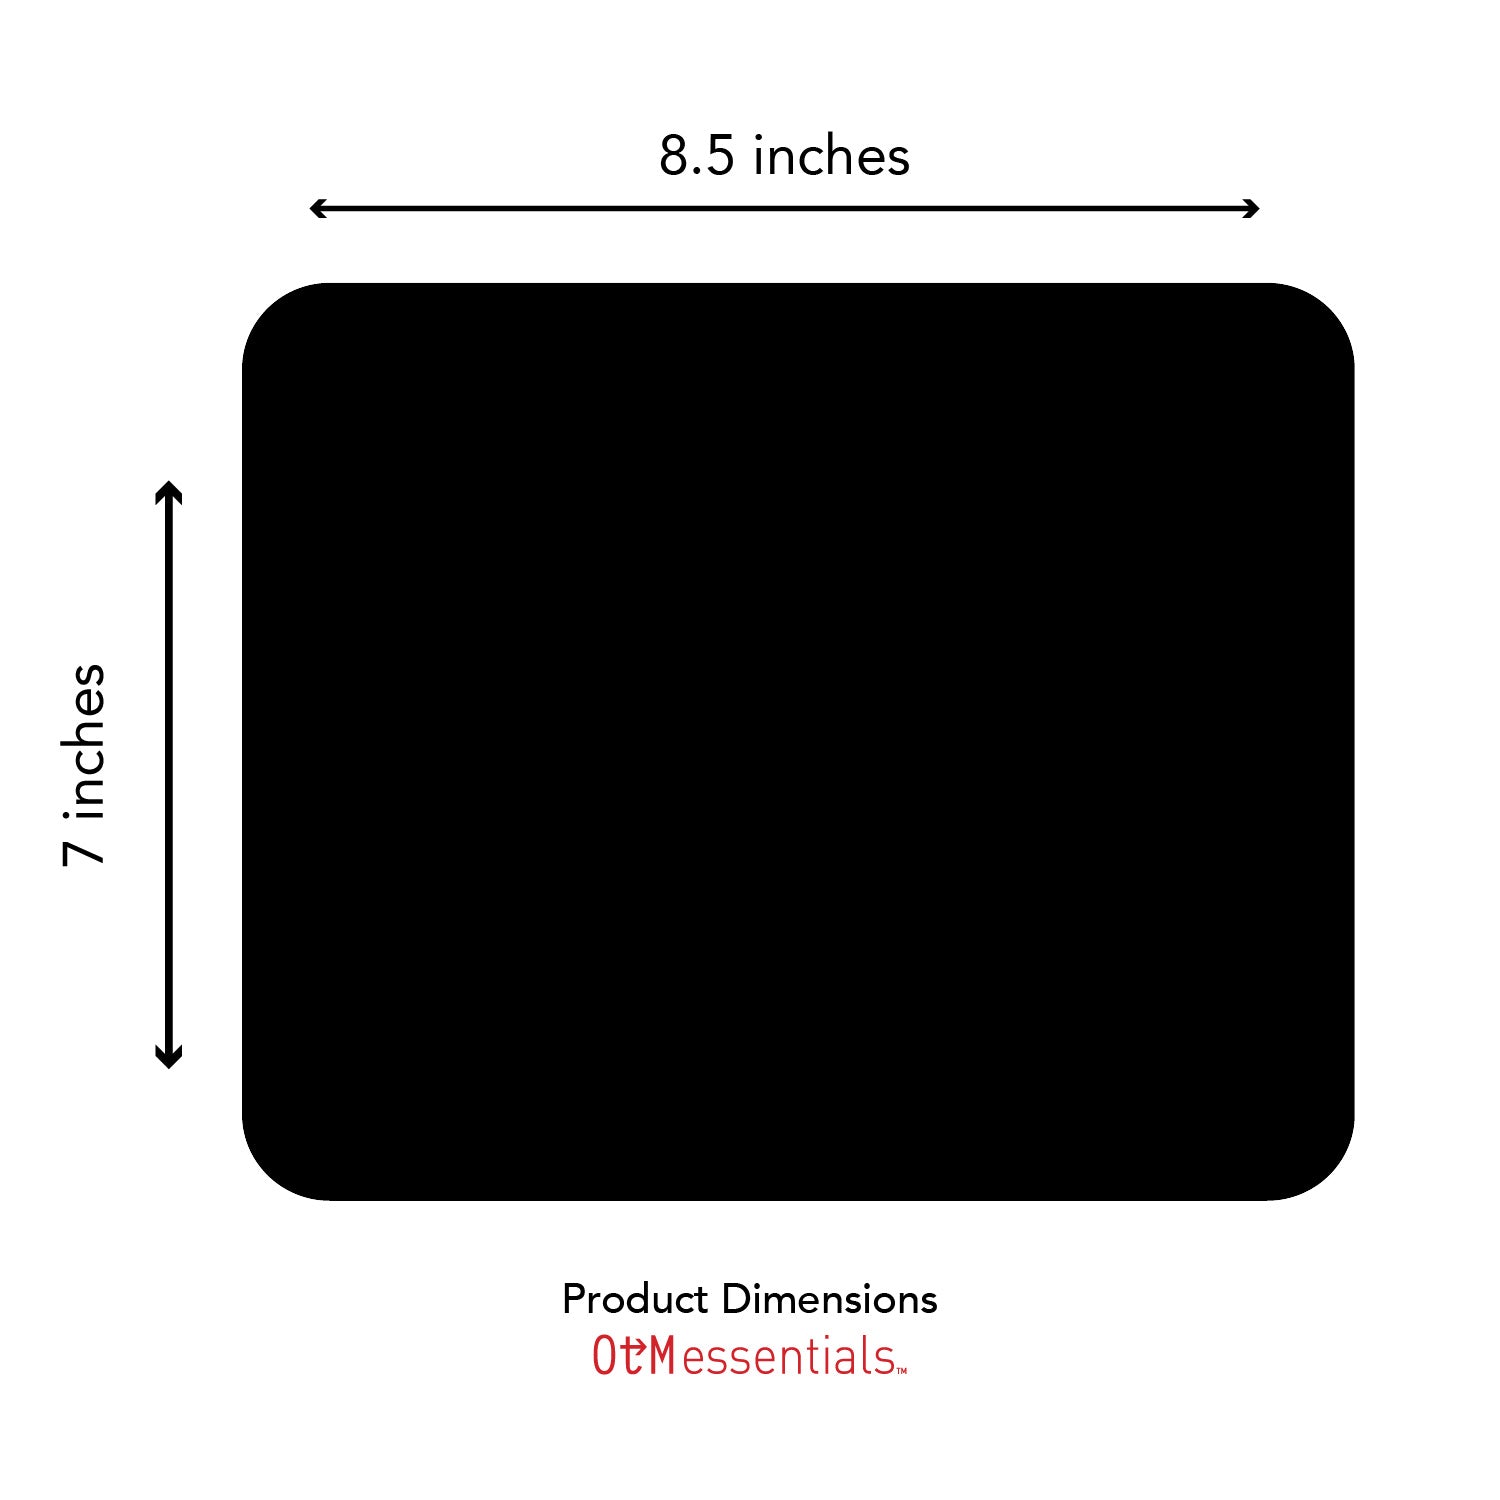 OC-UOF-MH39A, Product Dimensions